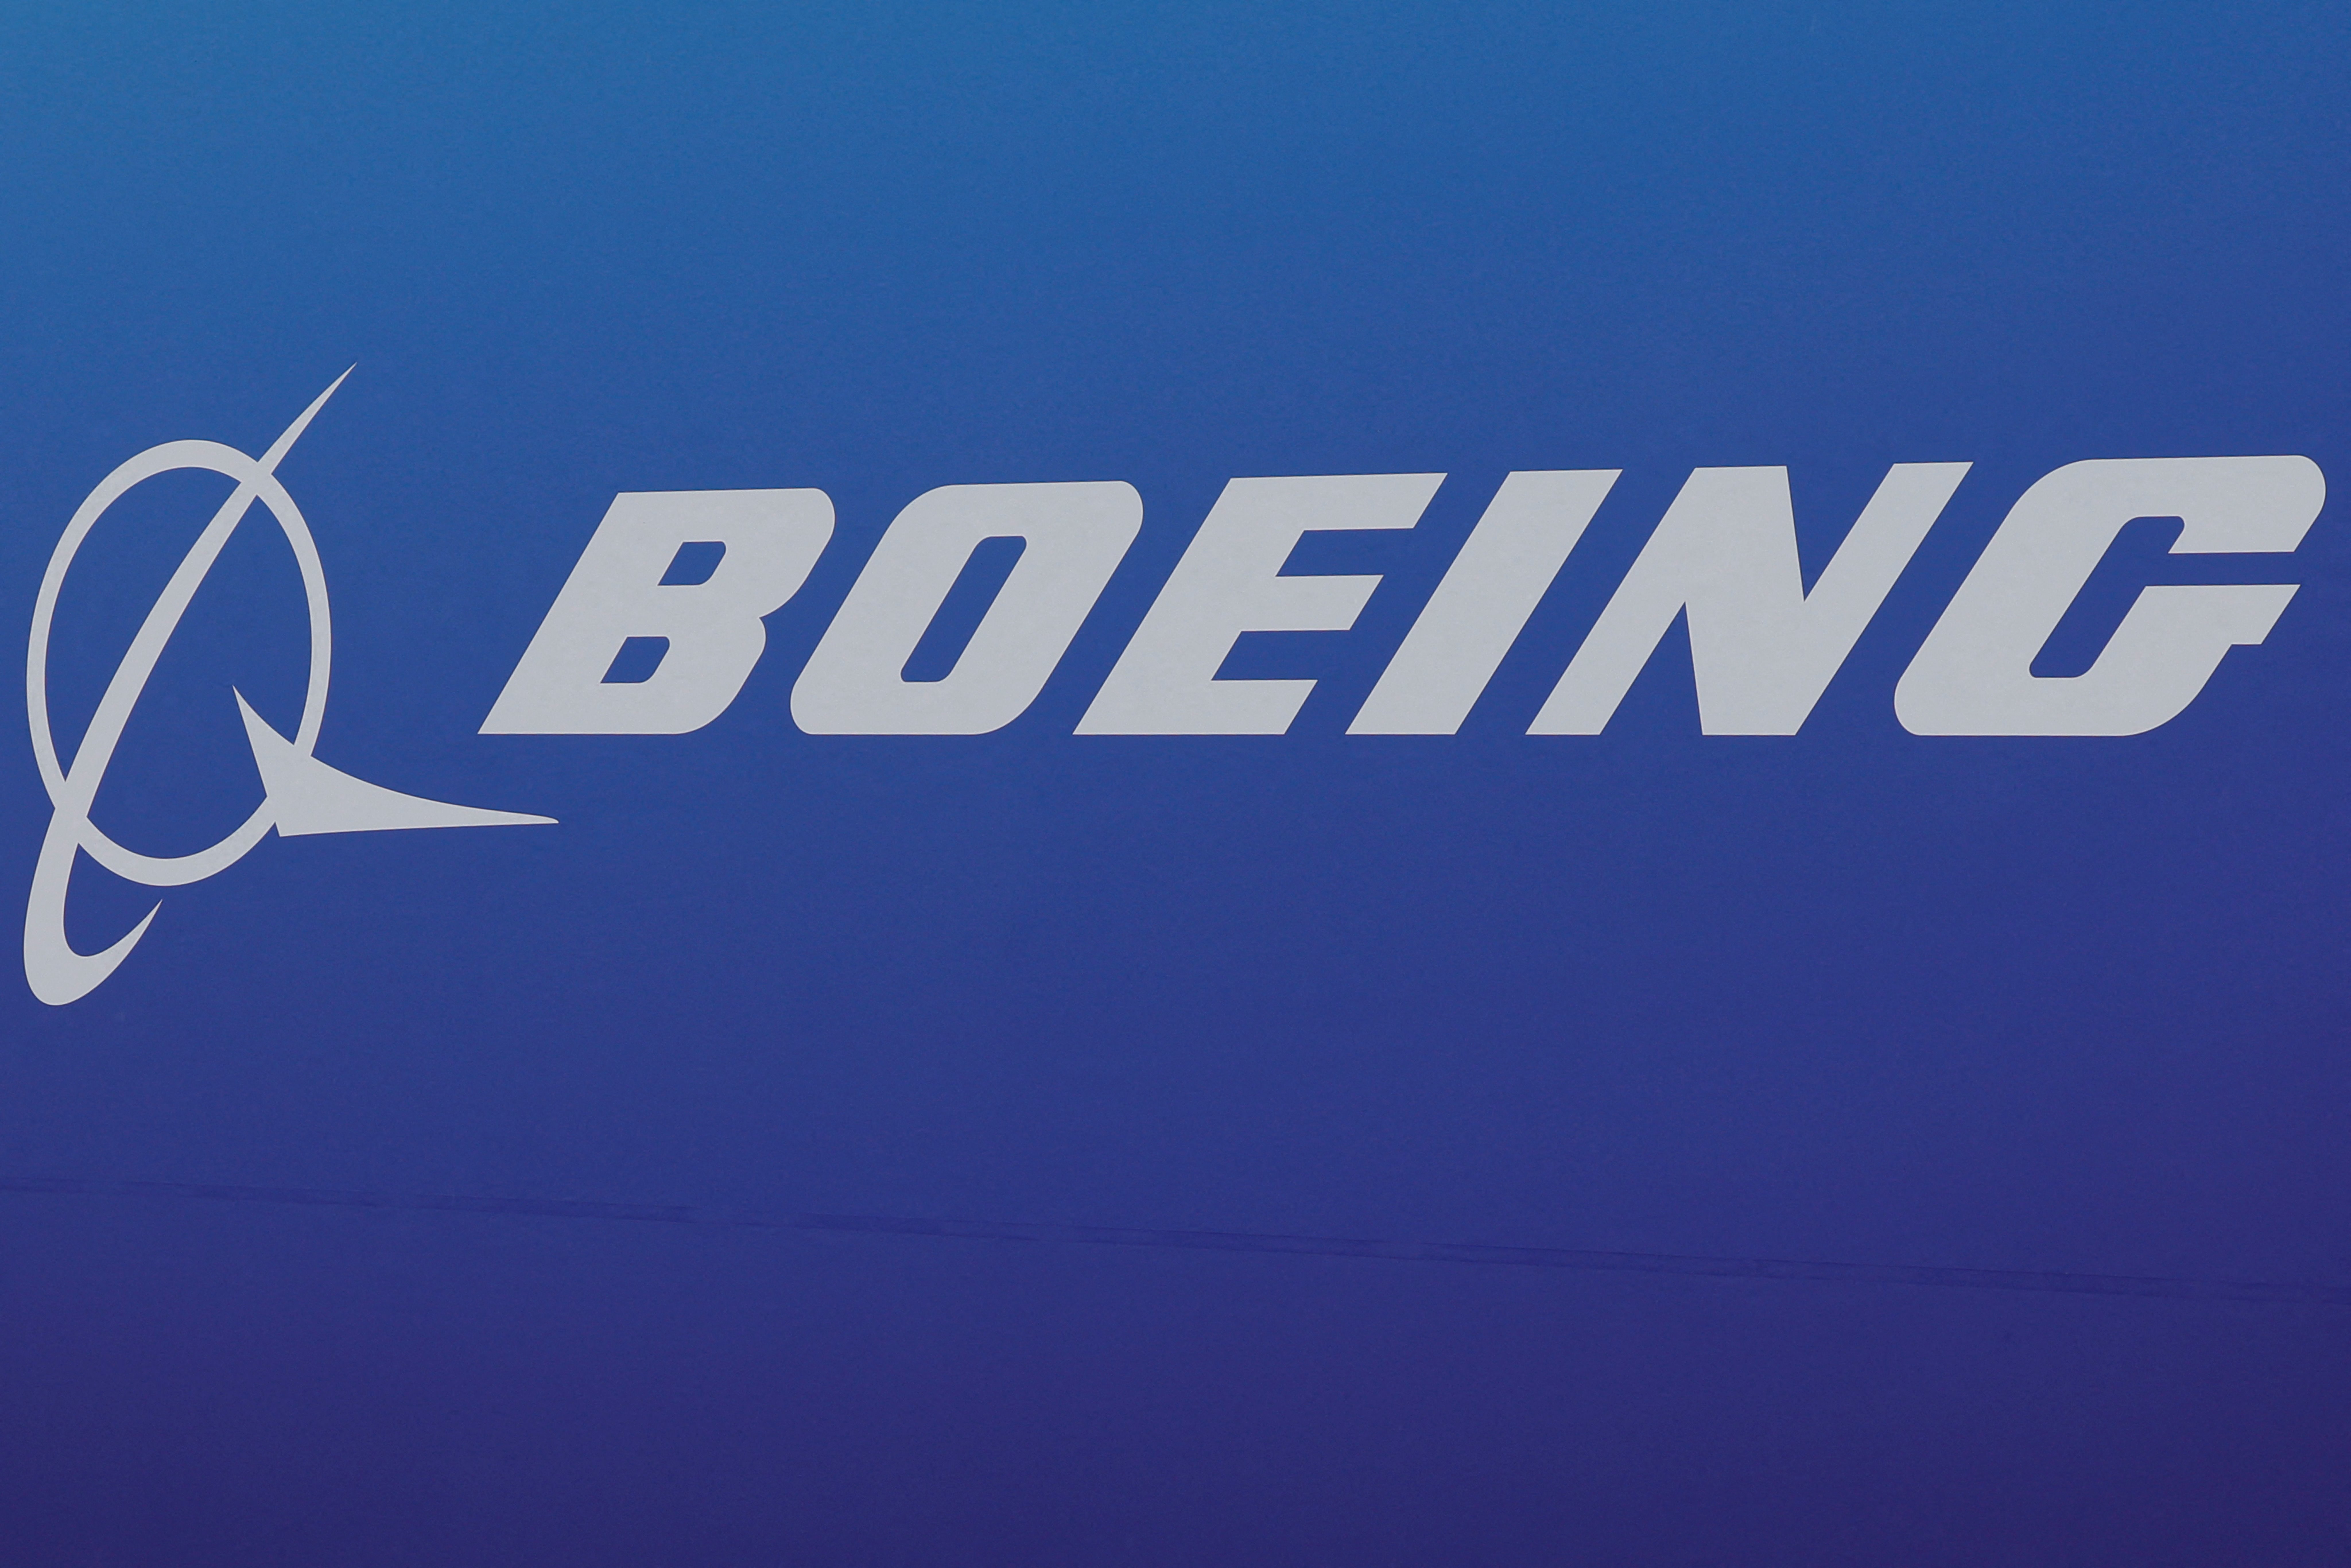 A logo of US aircraft maker Boeing is displayed during the International Paris Air Show at the ParisLe Bourget Airport, on June 20, 2023. (Photo by GEOFFROY VAN DER HASSELT/AFP via Getty Images)